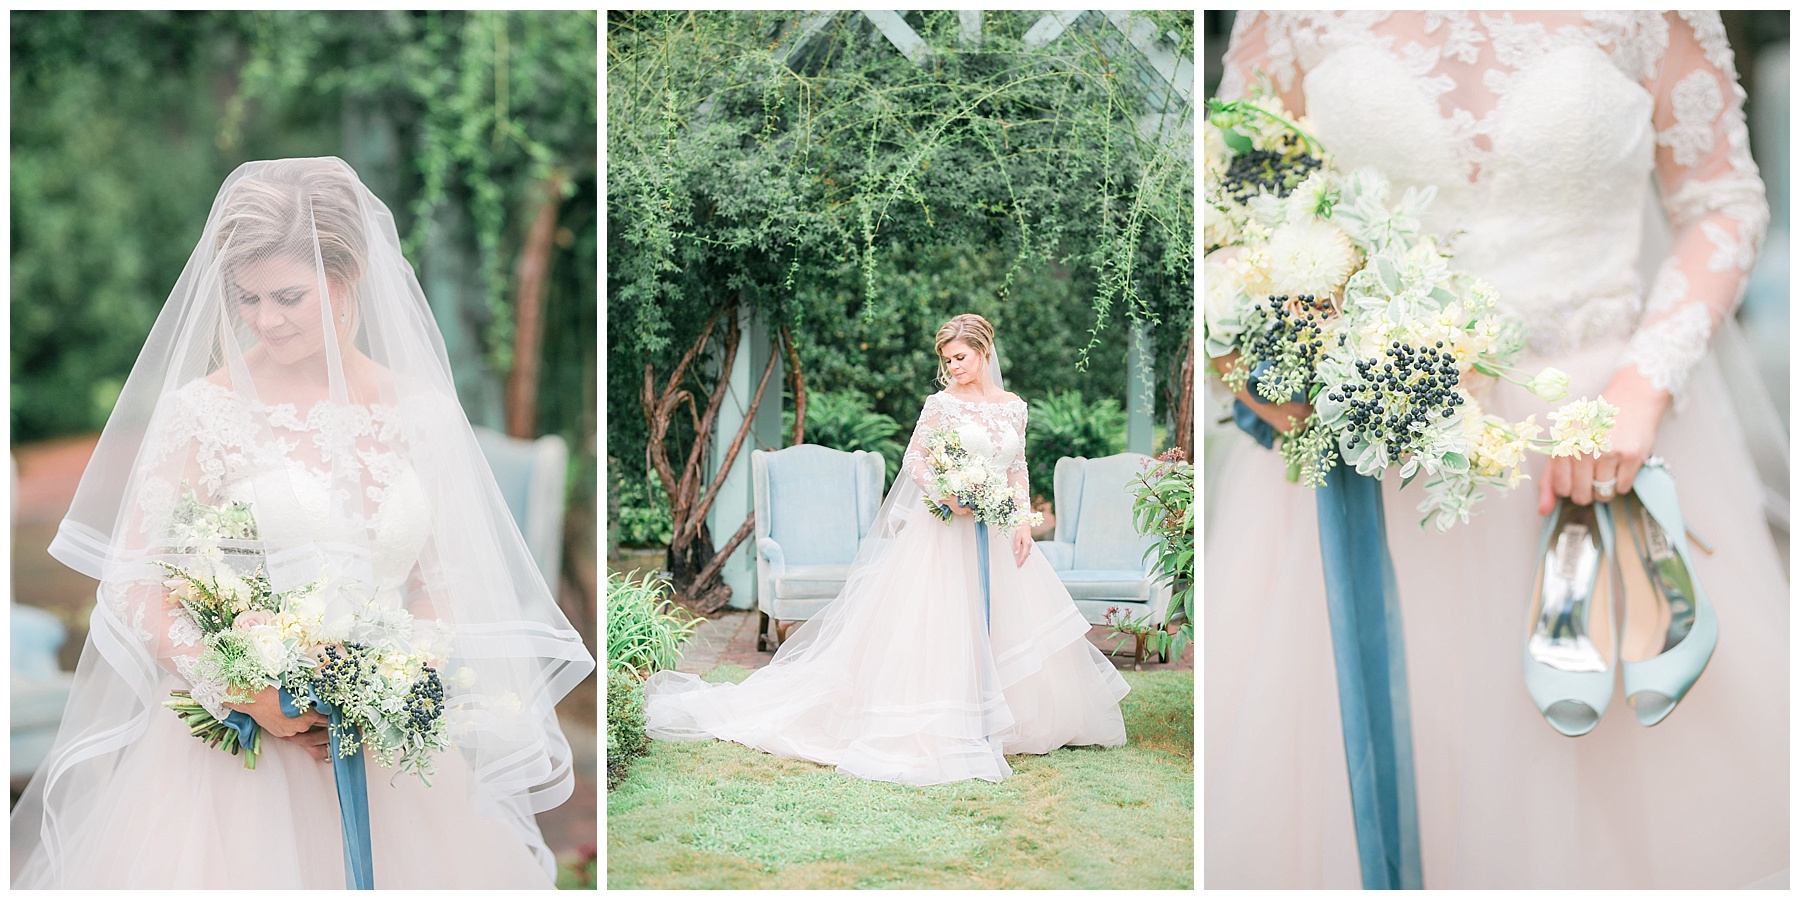 misty saves the day, erika mills photography, mad hatter vintage rentals, katherine hallberg design, ceindy doodles, blush tones, flawless on site, studio i do bridals, the hanging gardens virginia beach